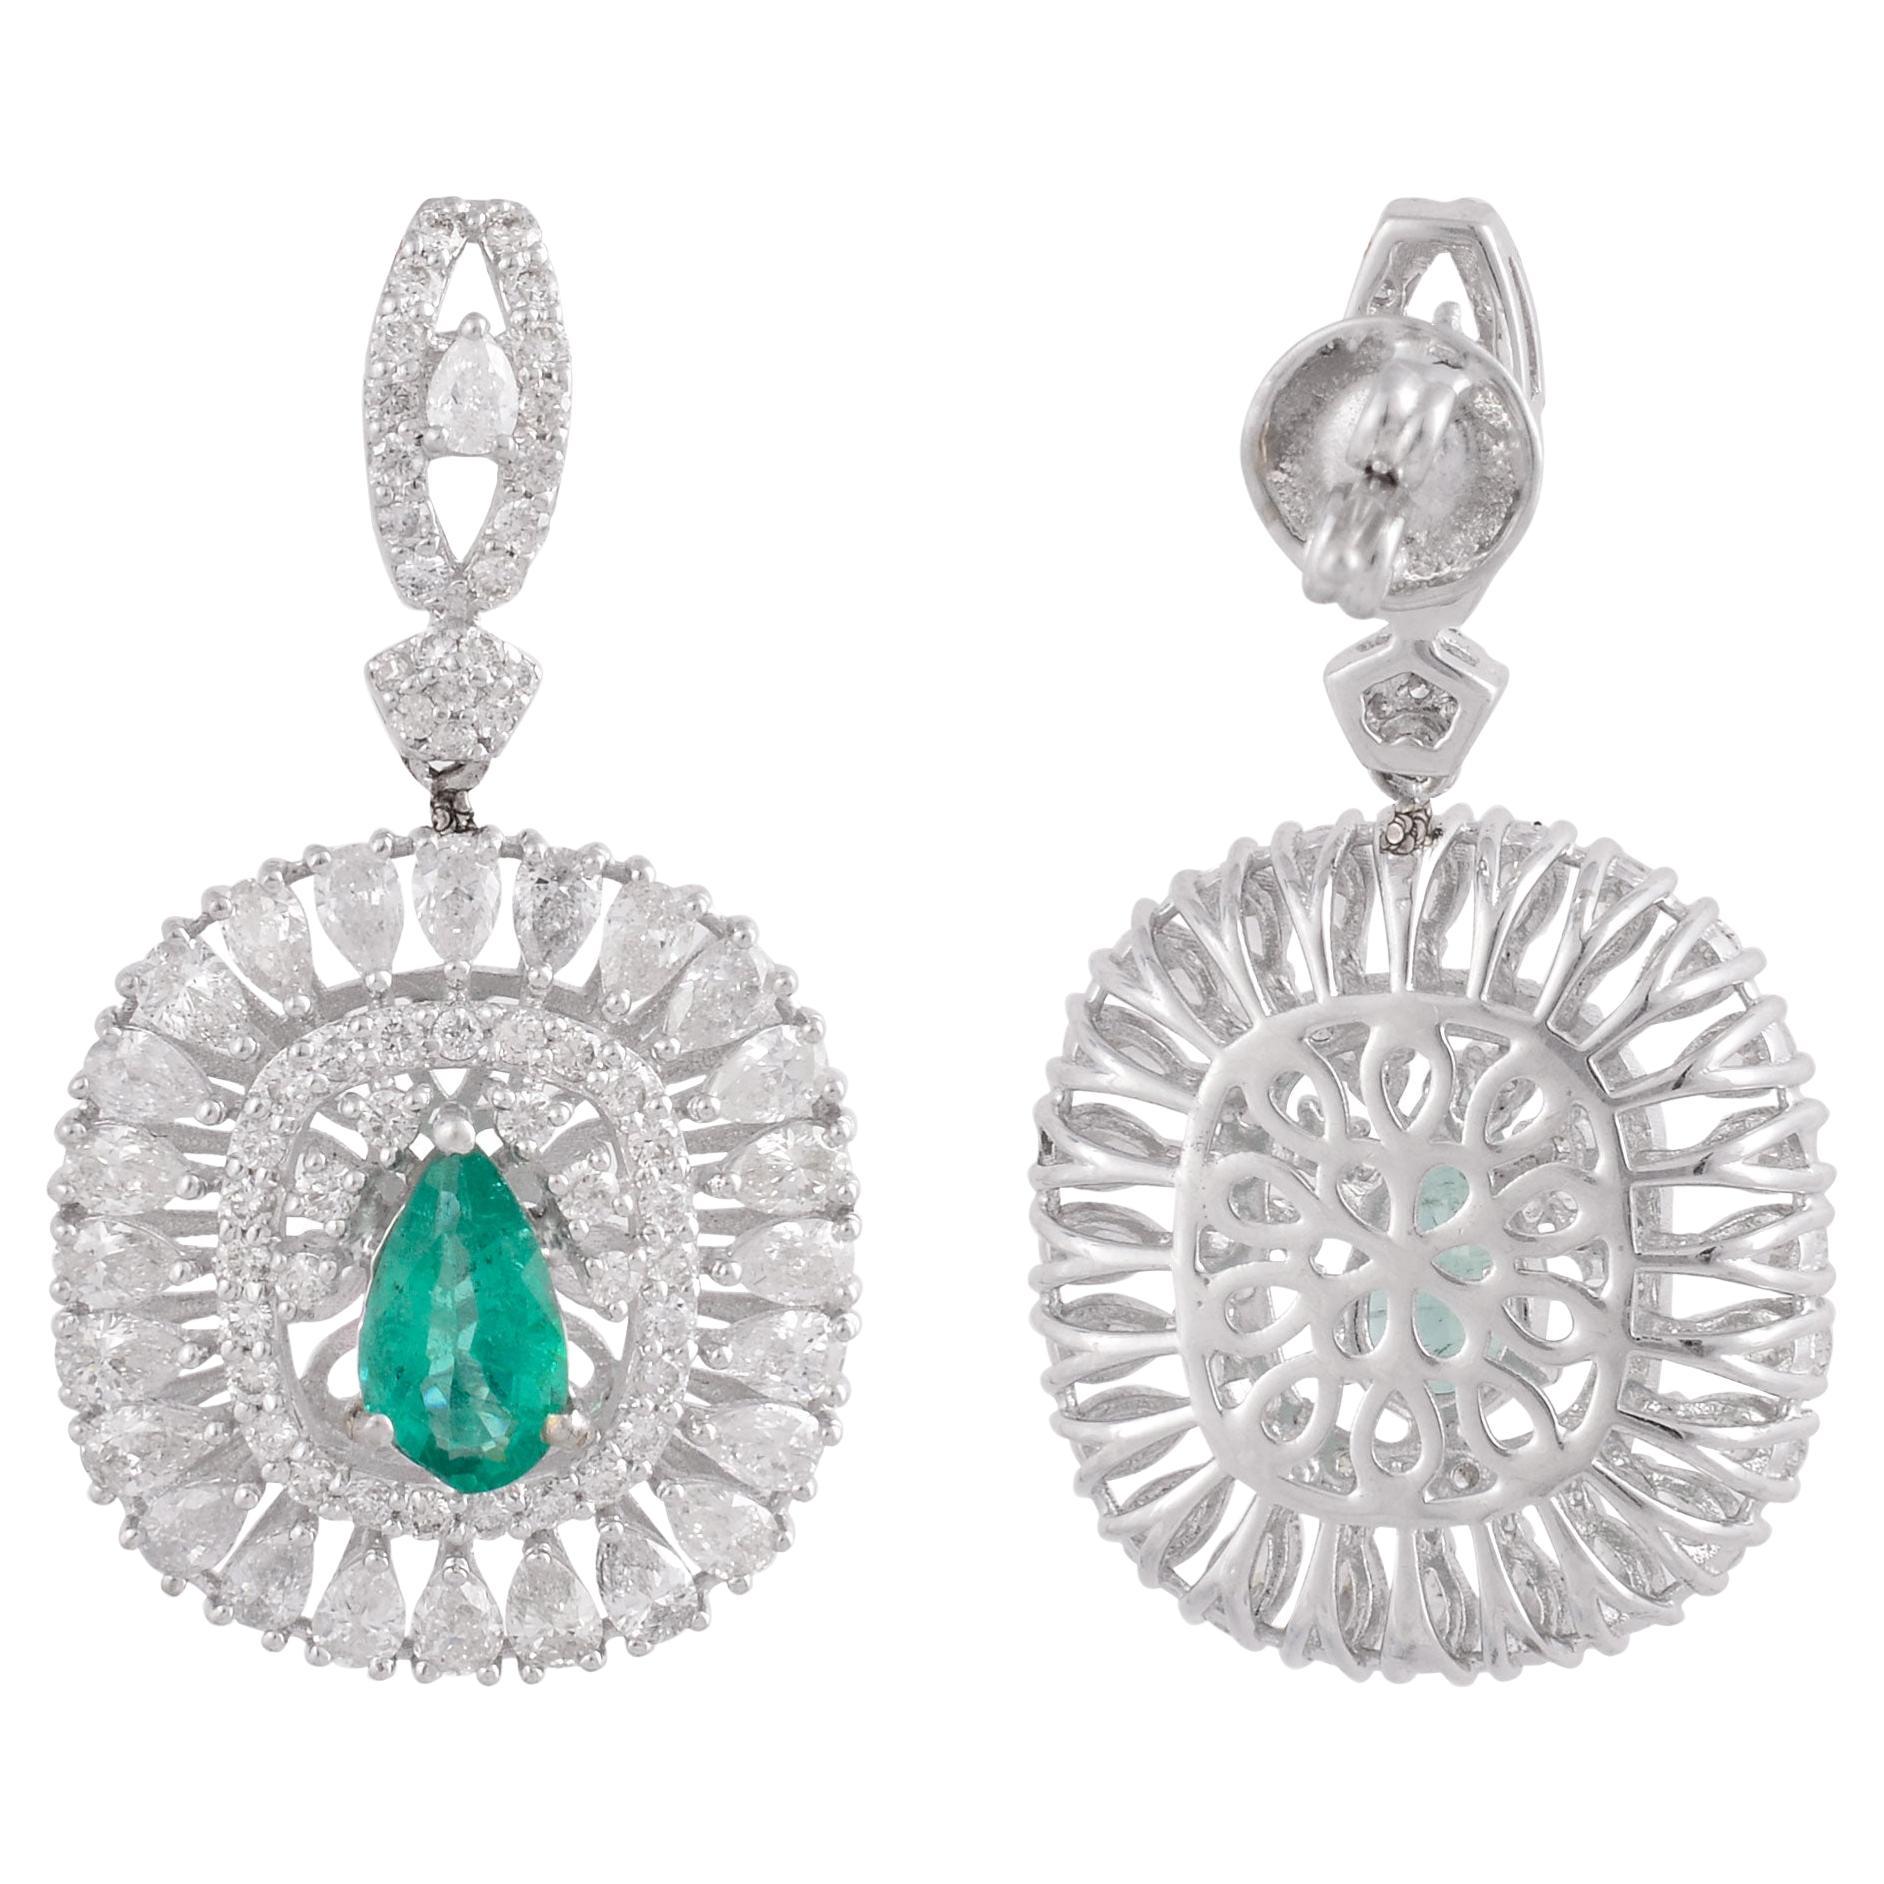 Item Code :- CN-21891A
Gross Wt. :- 11.30 gm
18k White Gold Wt. :- 10.15 gm
Diamond Wt. :- 4.40 Ct. ( AVERAGE DIAMOND CLARITY SI1-SI2 & COLOR H-I )
Emerald Wt. :- 1.35 Ct.
Earrings Size :- 33.16 x 16.14 mm approx.
✦ Sizing
.....................
We